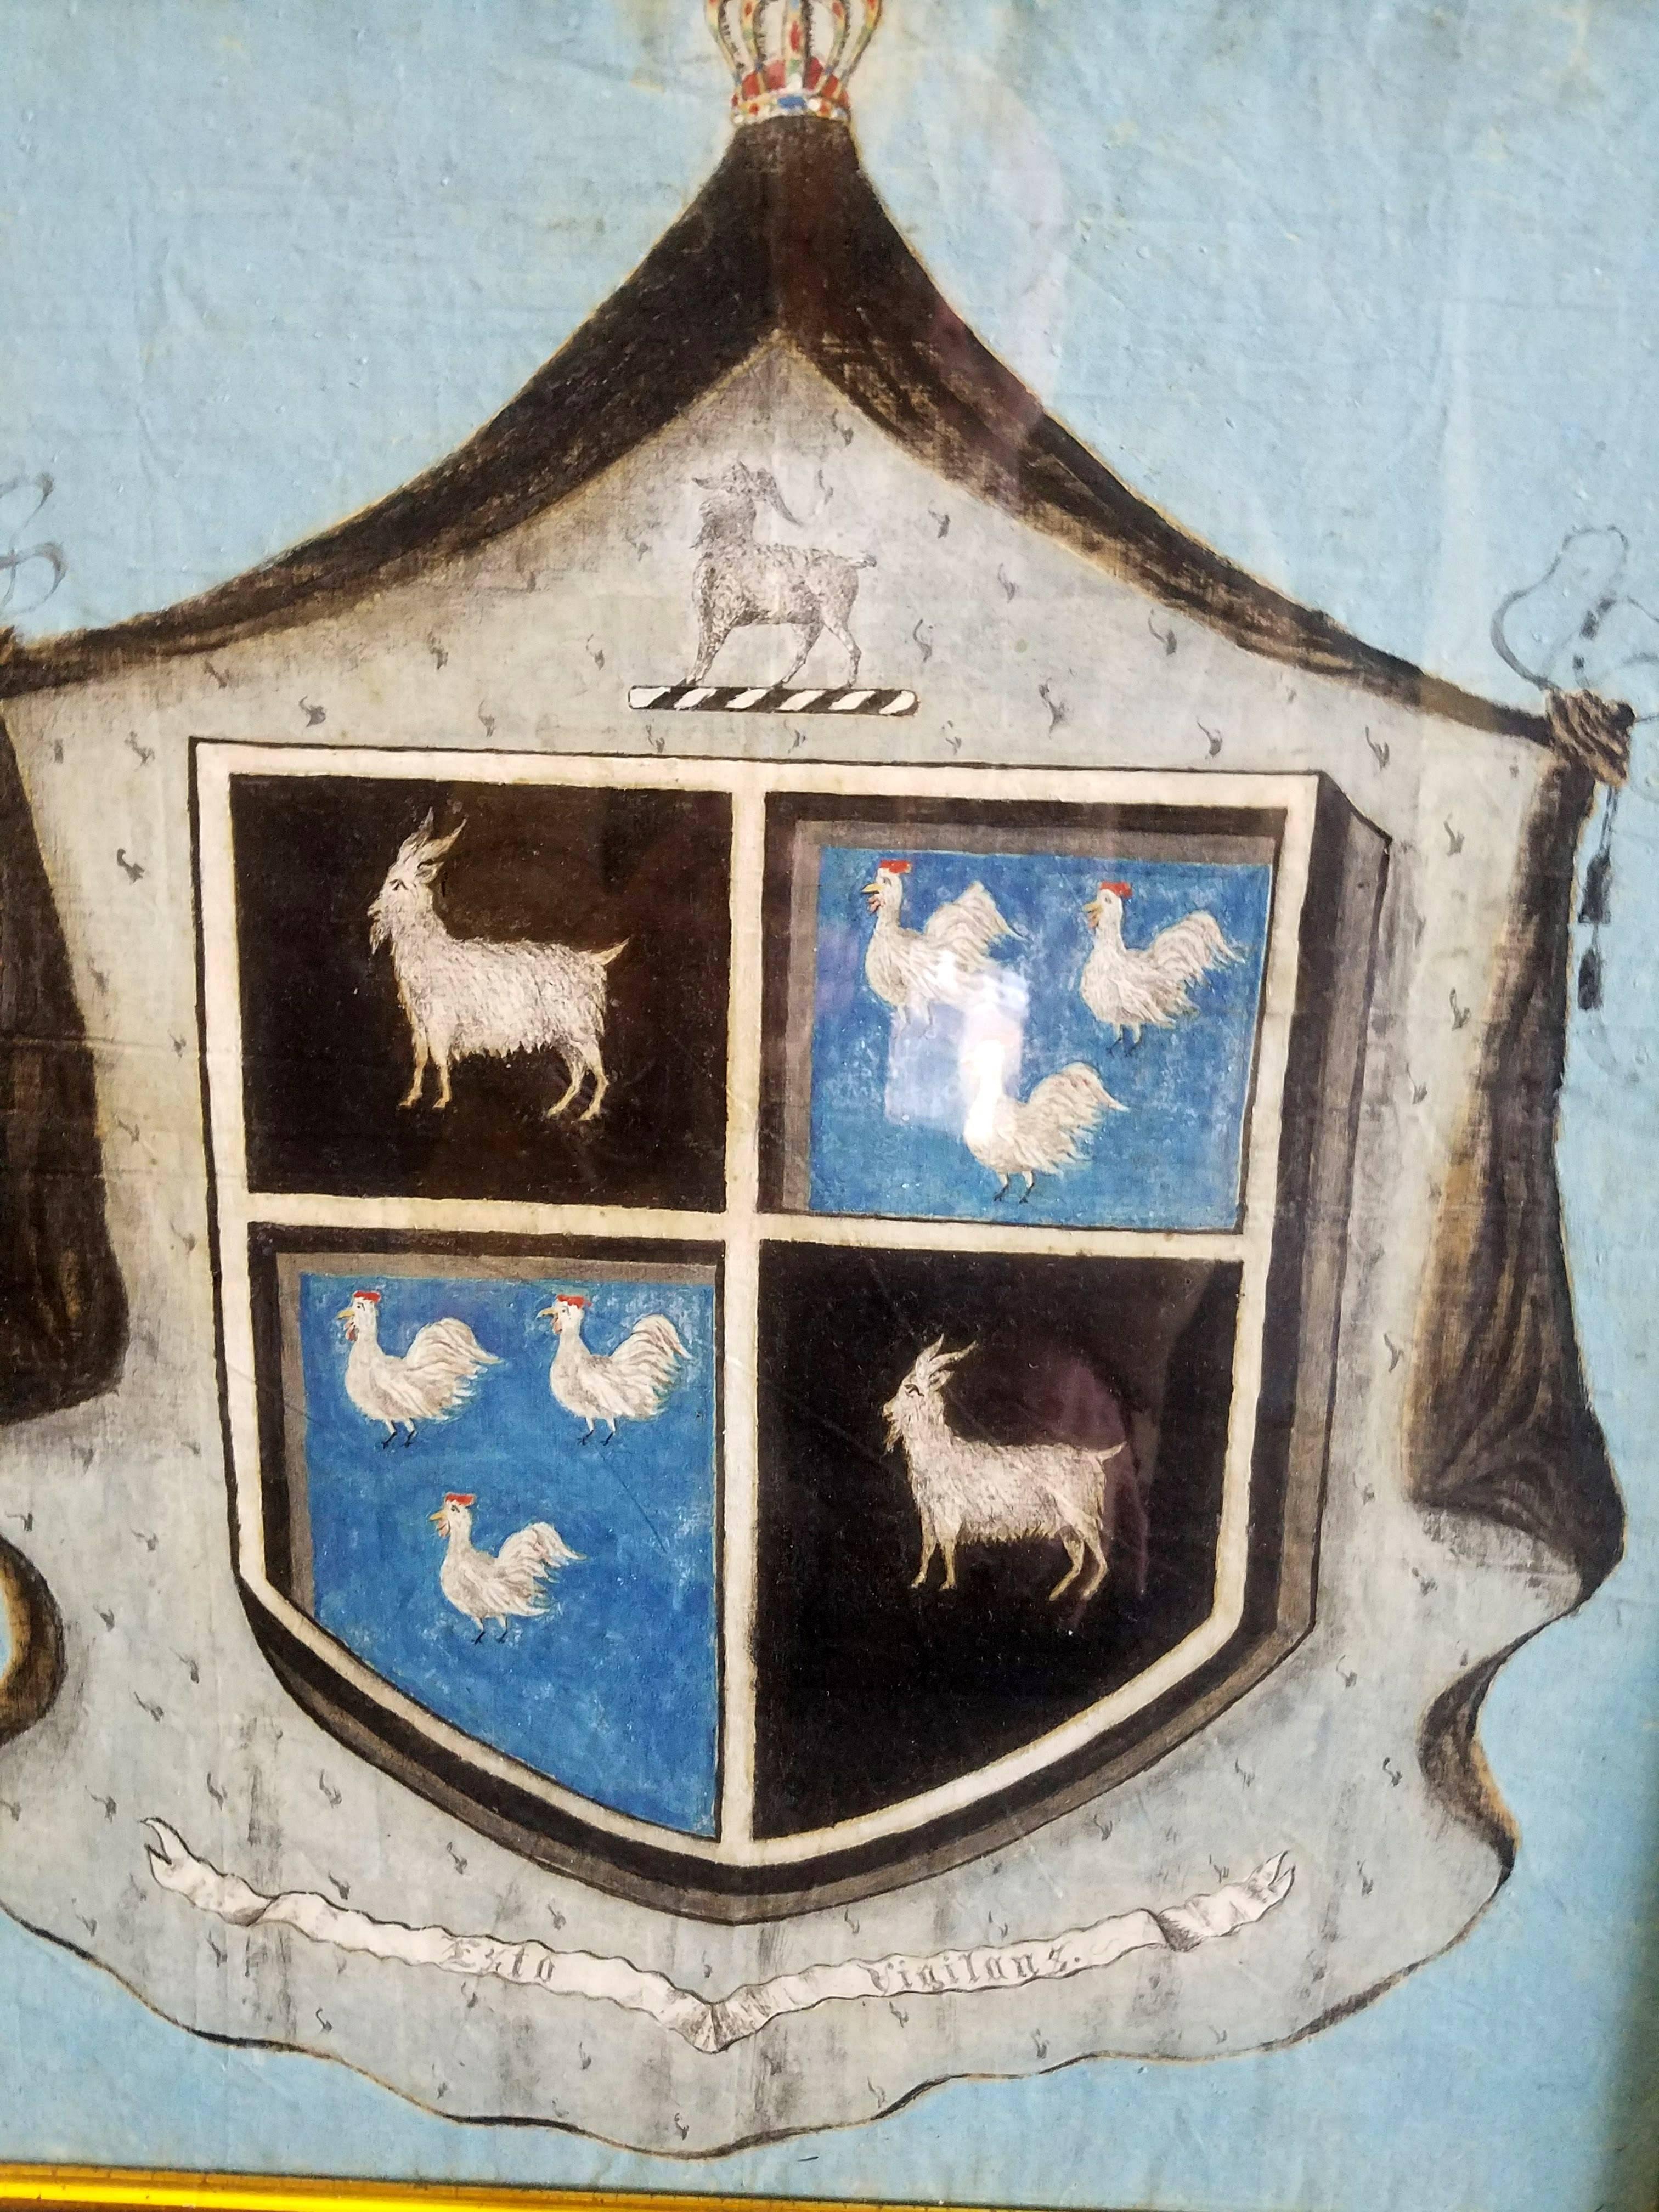 Painted Coat of Arms on Canvas, 
Motto- Esto Vigilans.
18th century
Possibly Spanish.

The unusual coat of arms is painted on canvas. The arms depict a statant goat argent quartering three chickens or cockerels argent. The motto Esto Vigilans